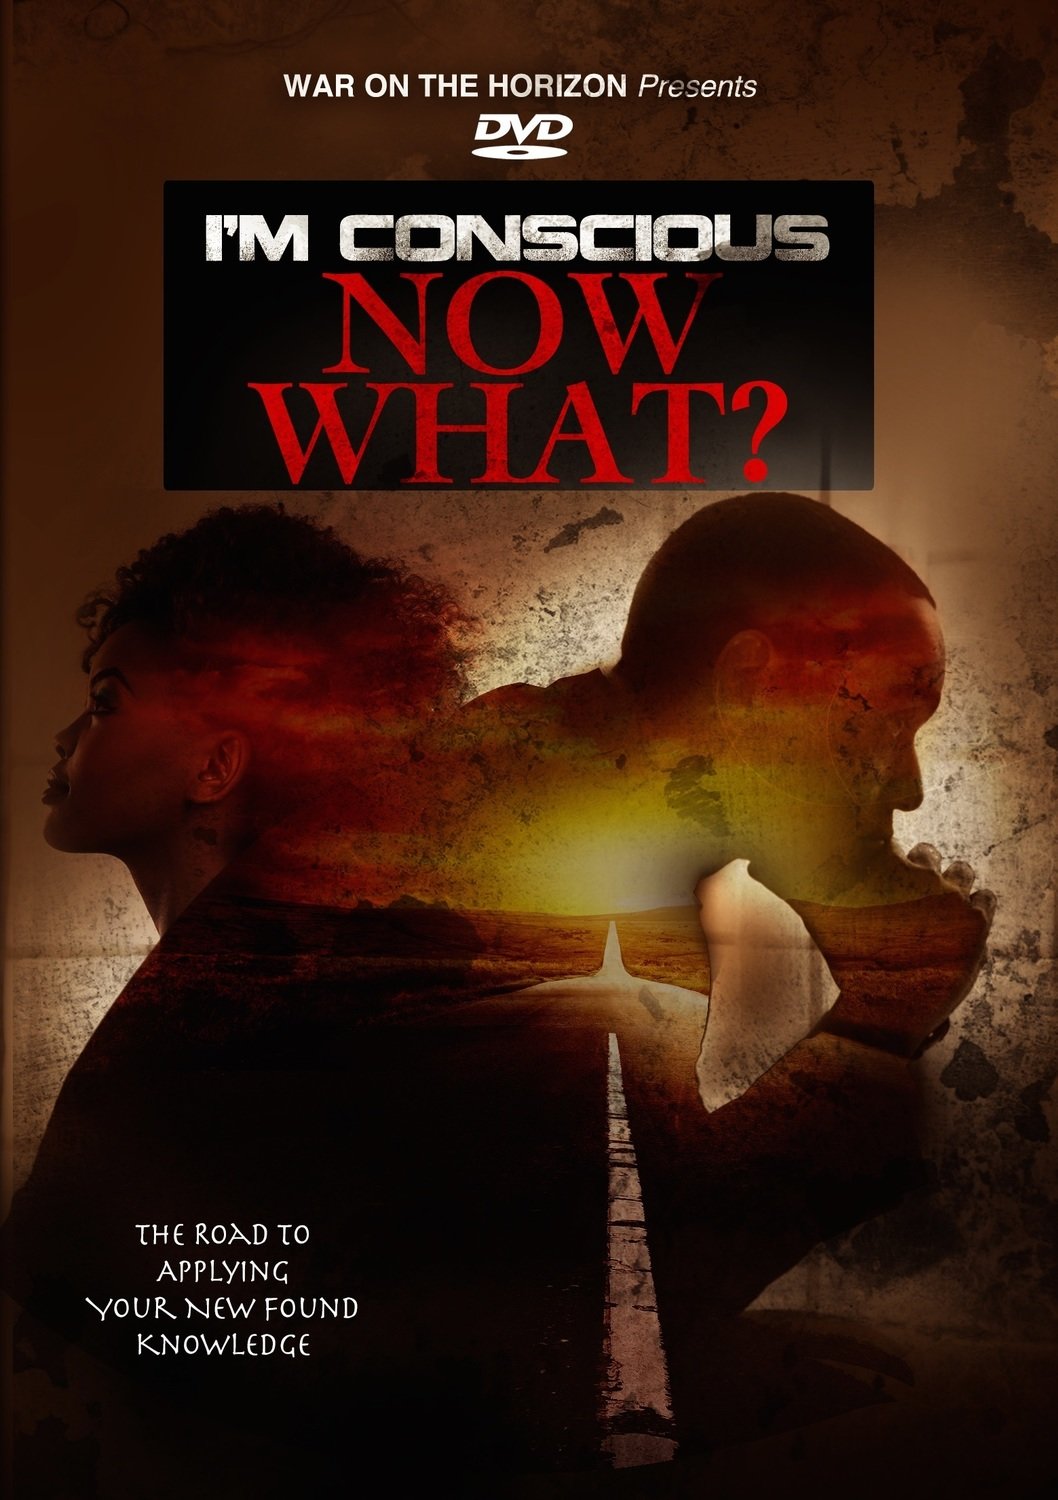 I'm Conscious: Now What? .mp4 Electronic Email Version